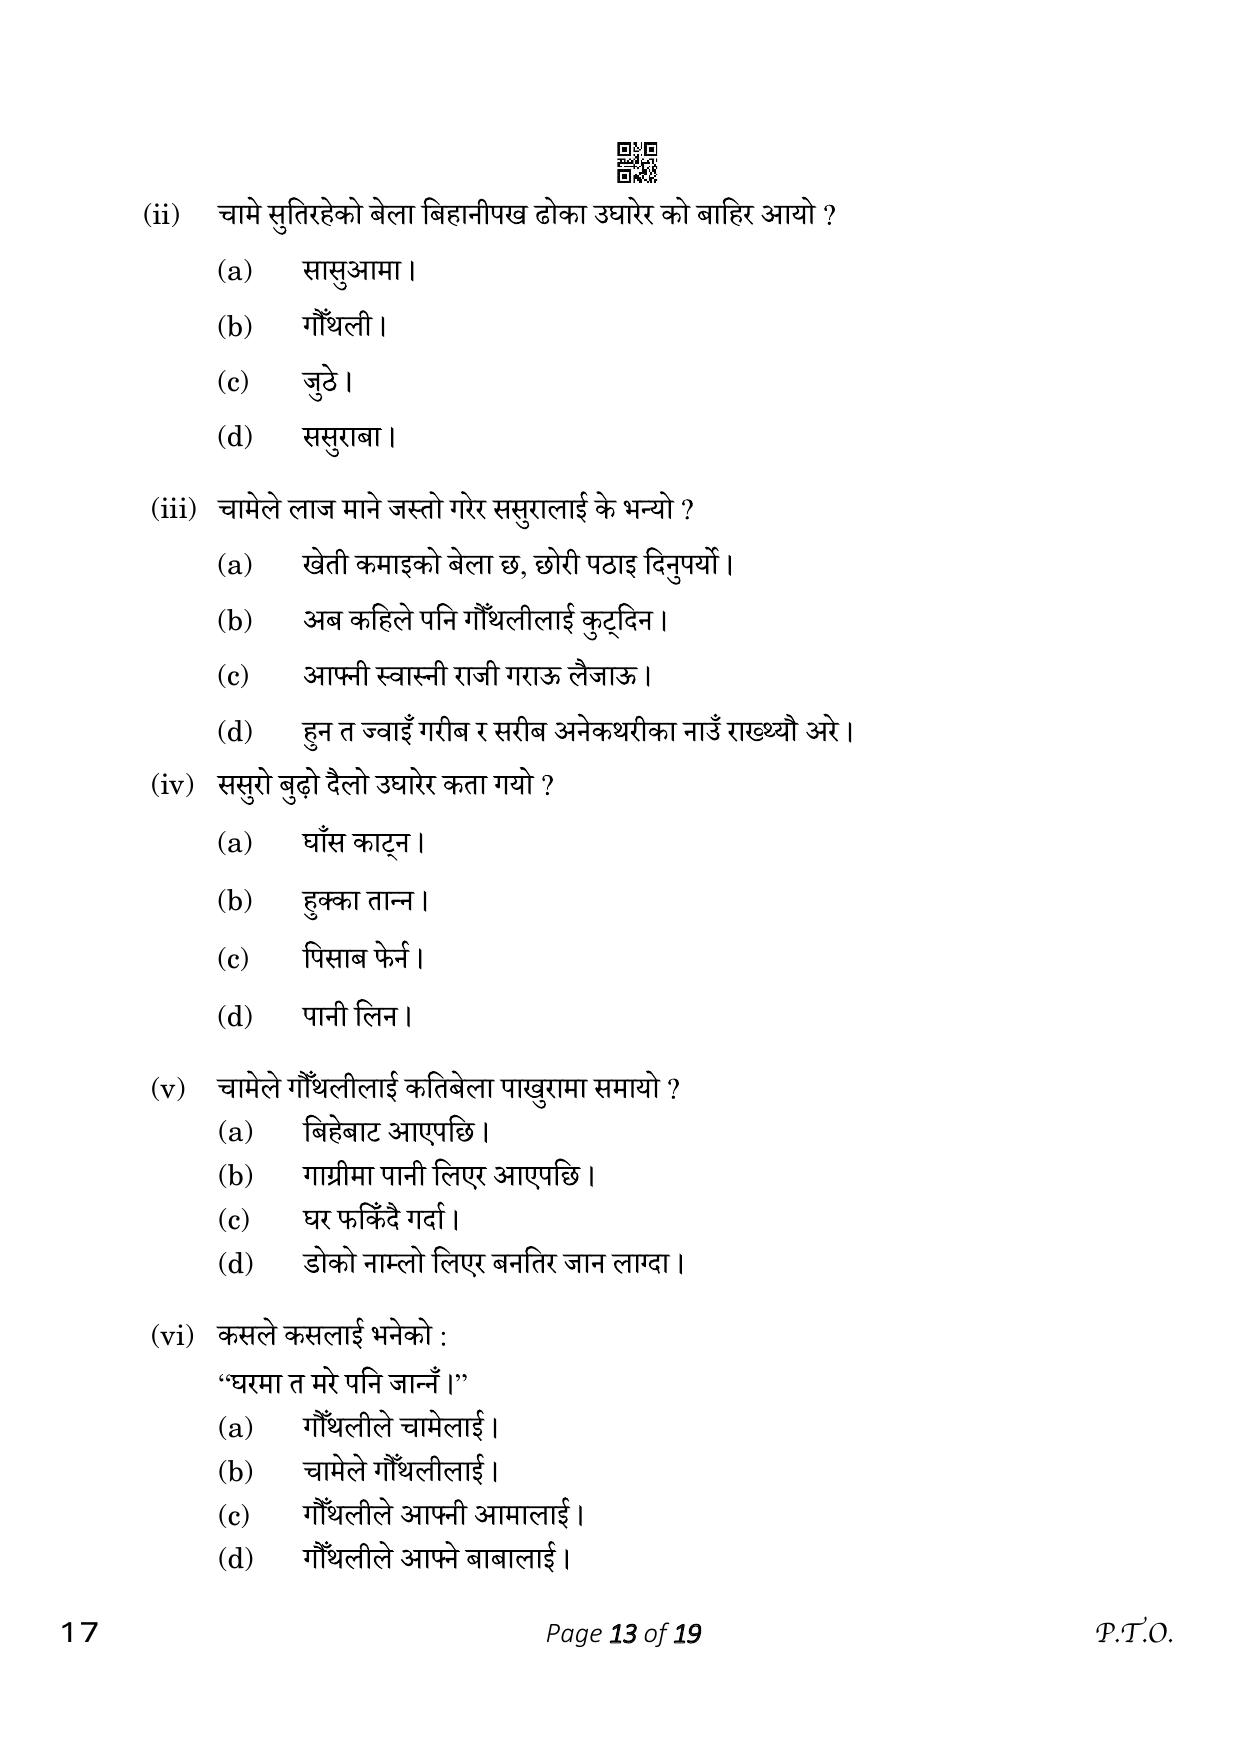 CBSE Class 10 Nepali (Compartment) 2023 Question Paper - Page 13